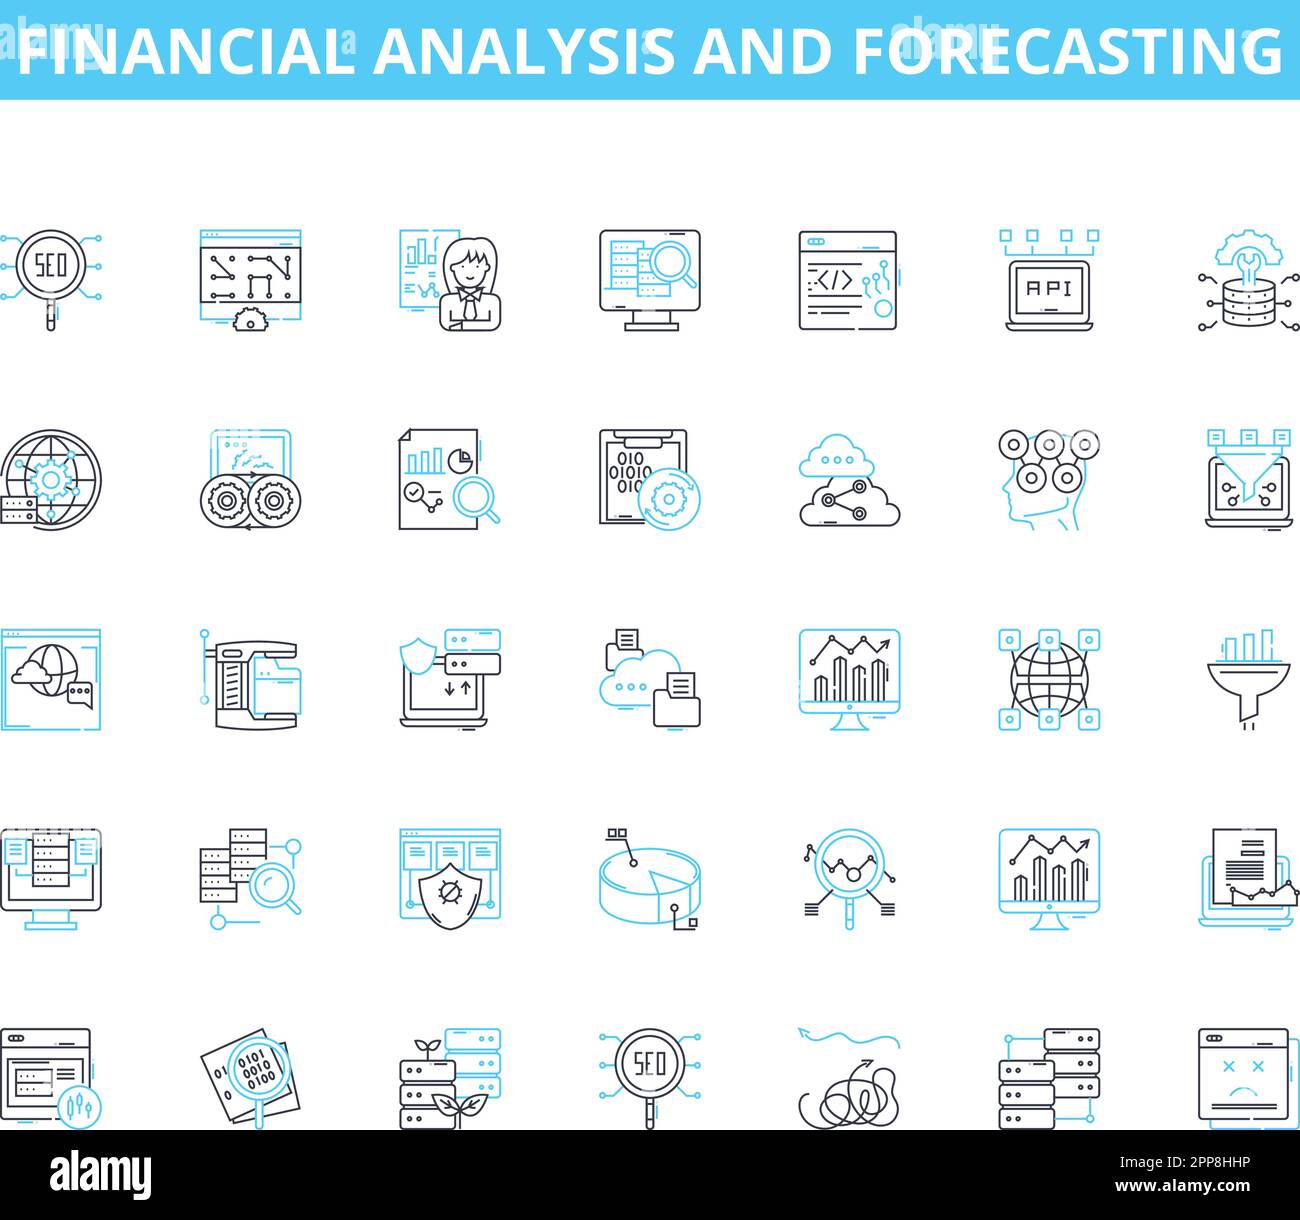 Financial analysis and forecasting linear icons set. Risk, Revenue, Budget, Investment, Cashflow, Growth, Forecasting line vector and concept signs Stock Vector